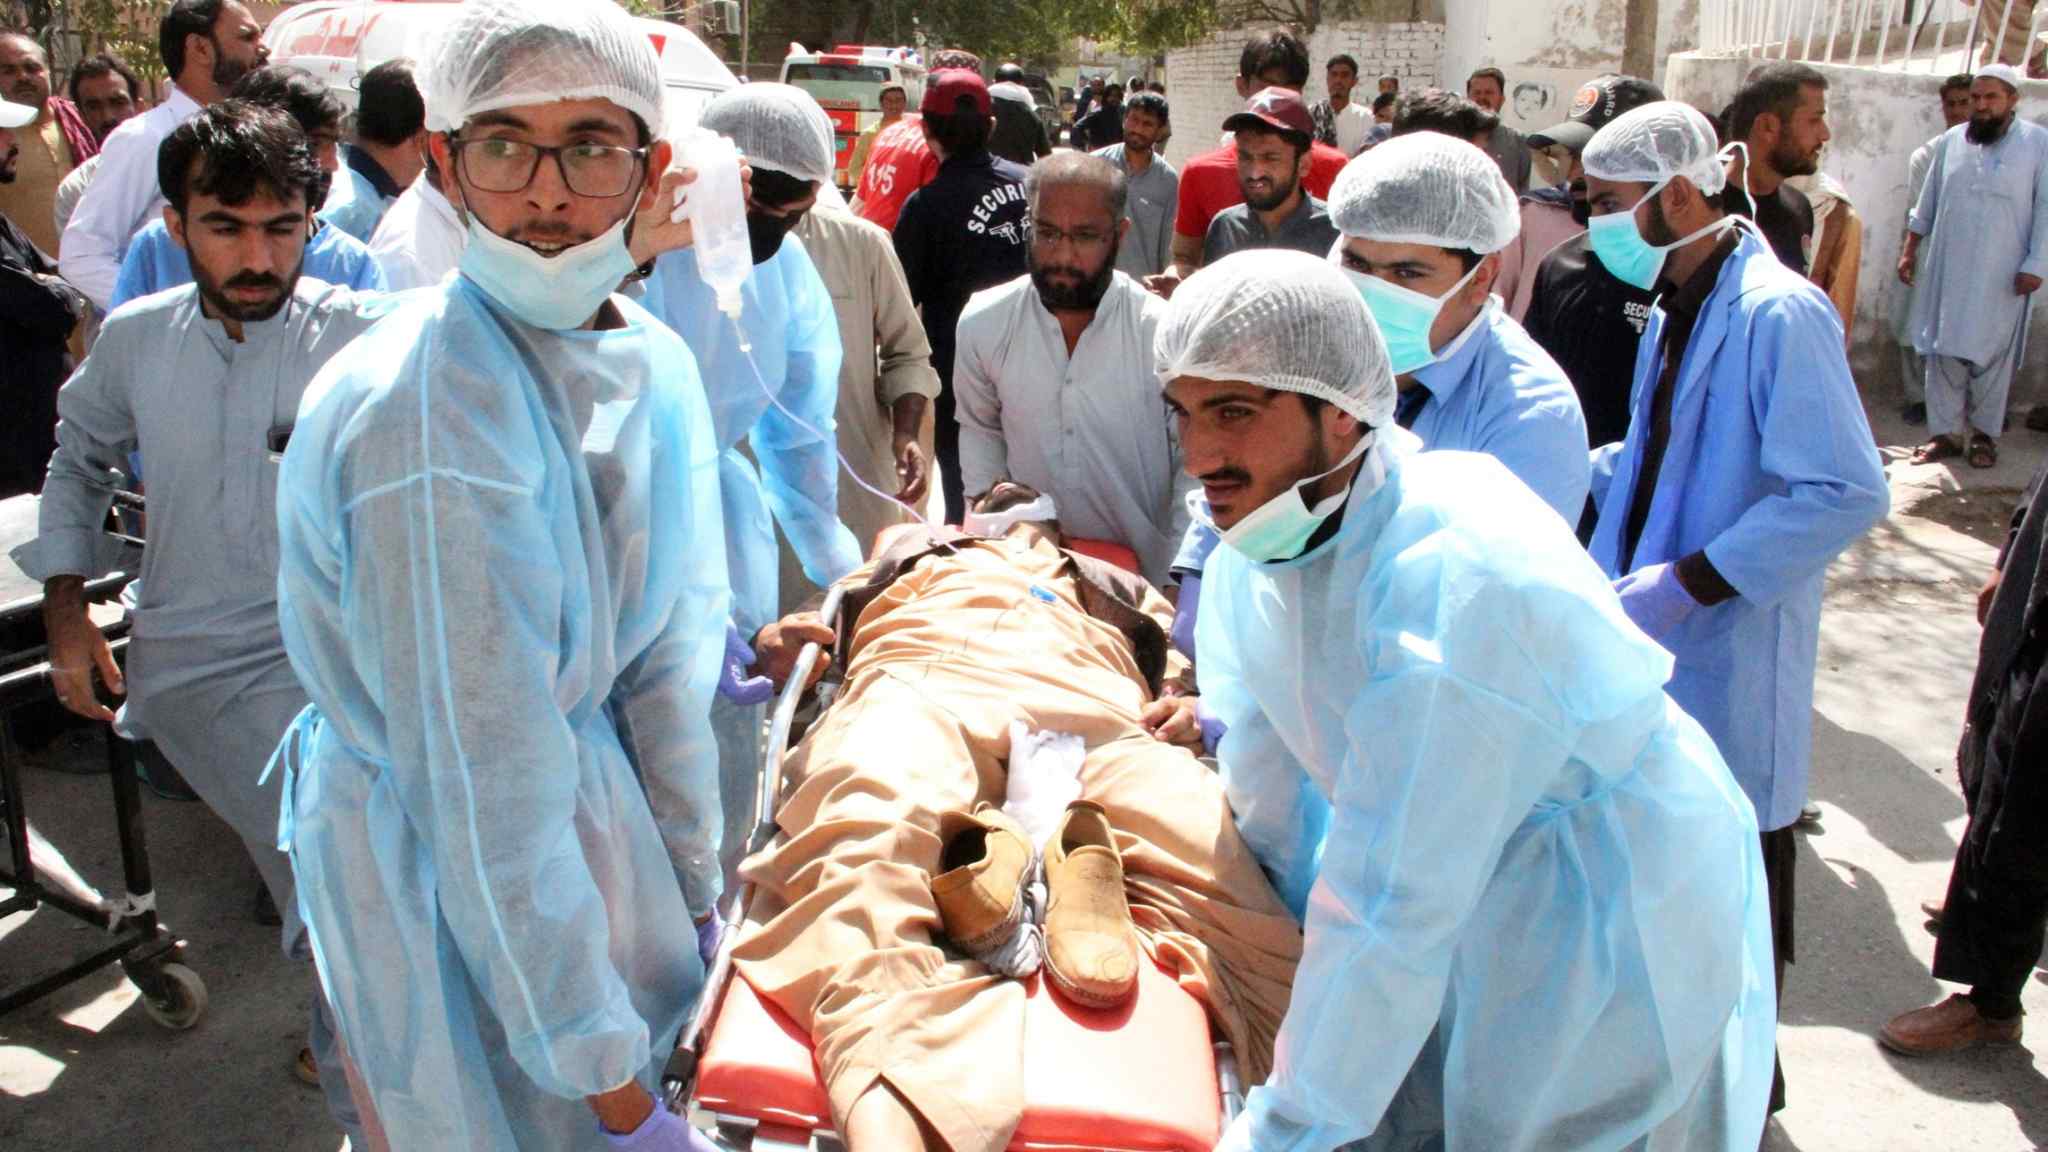 Suicide bombers kill more than 50 people in Pakistan attacks